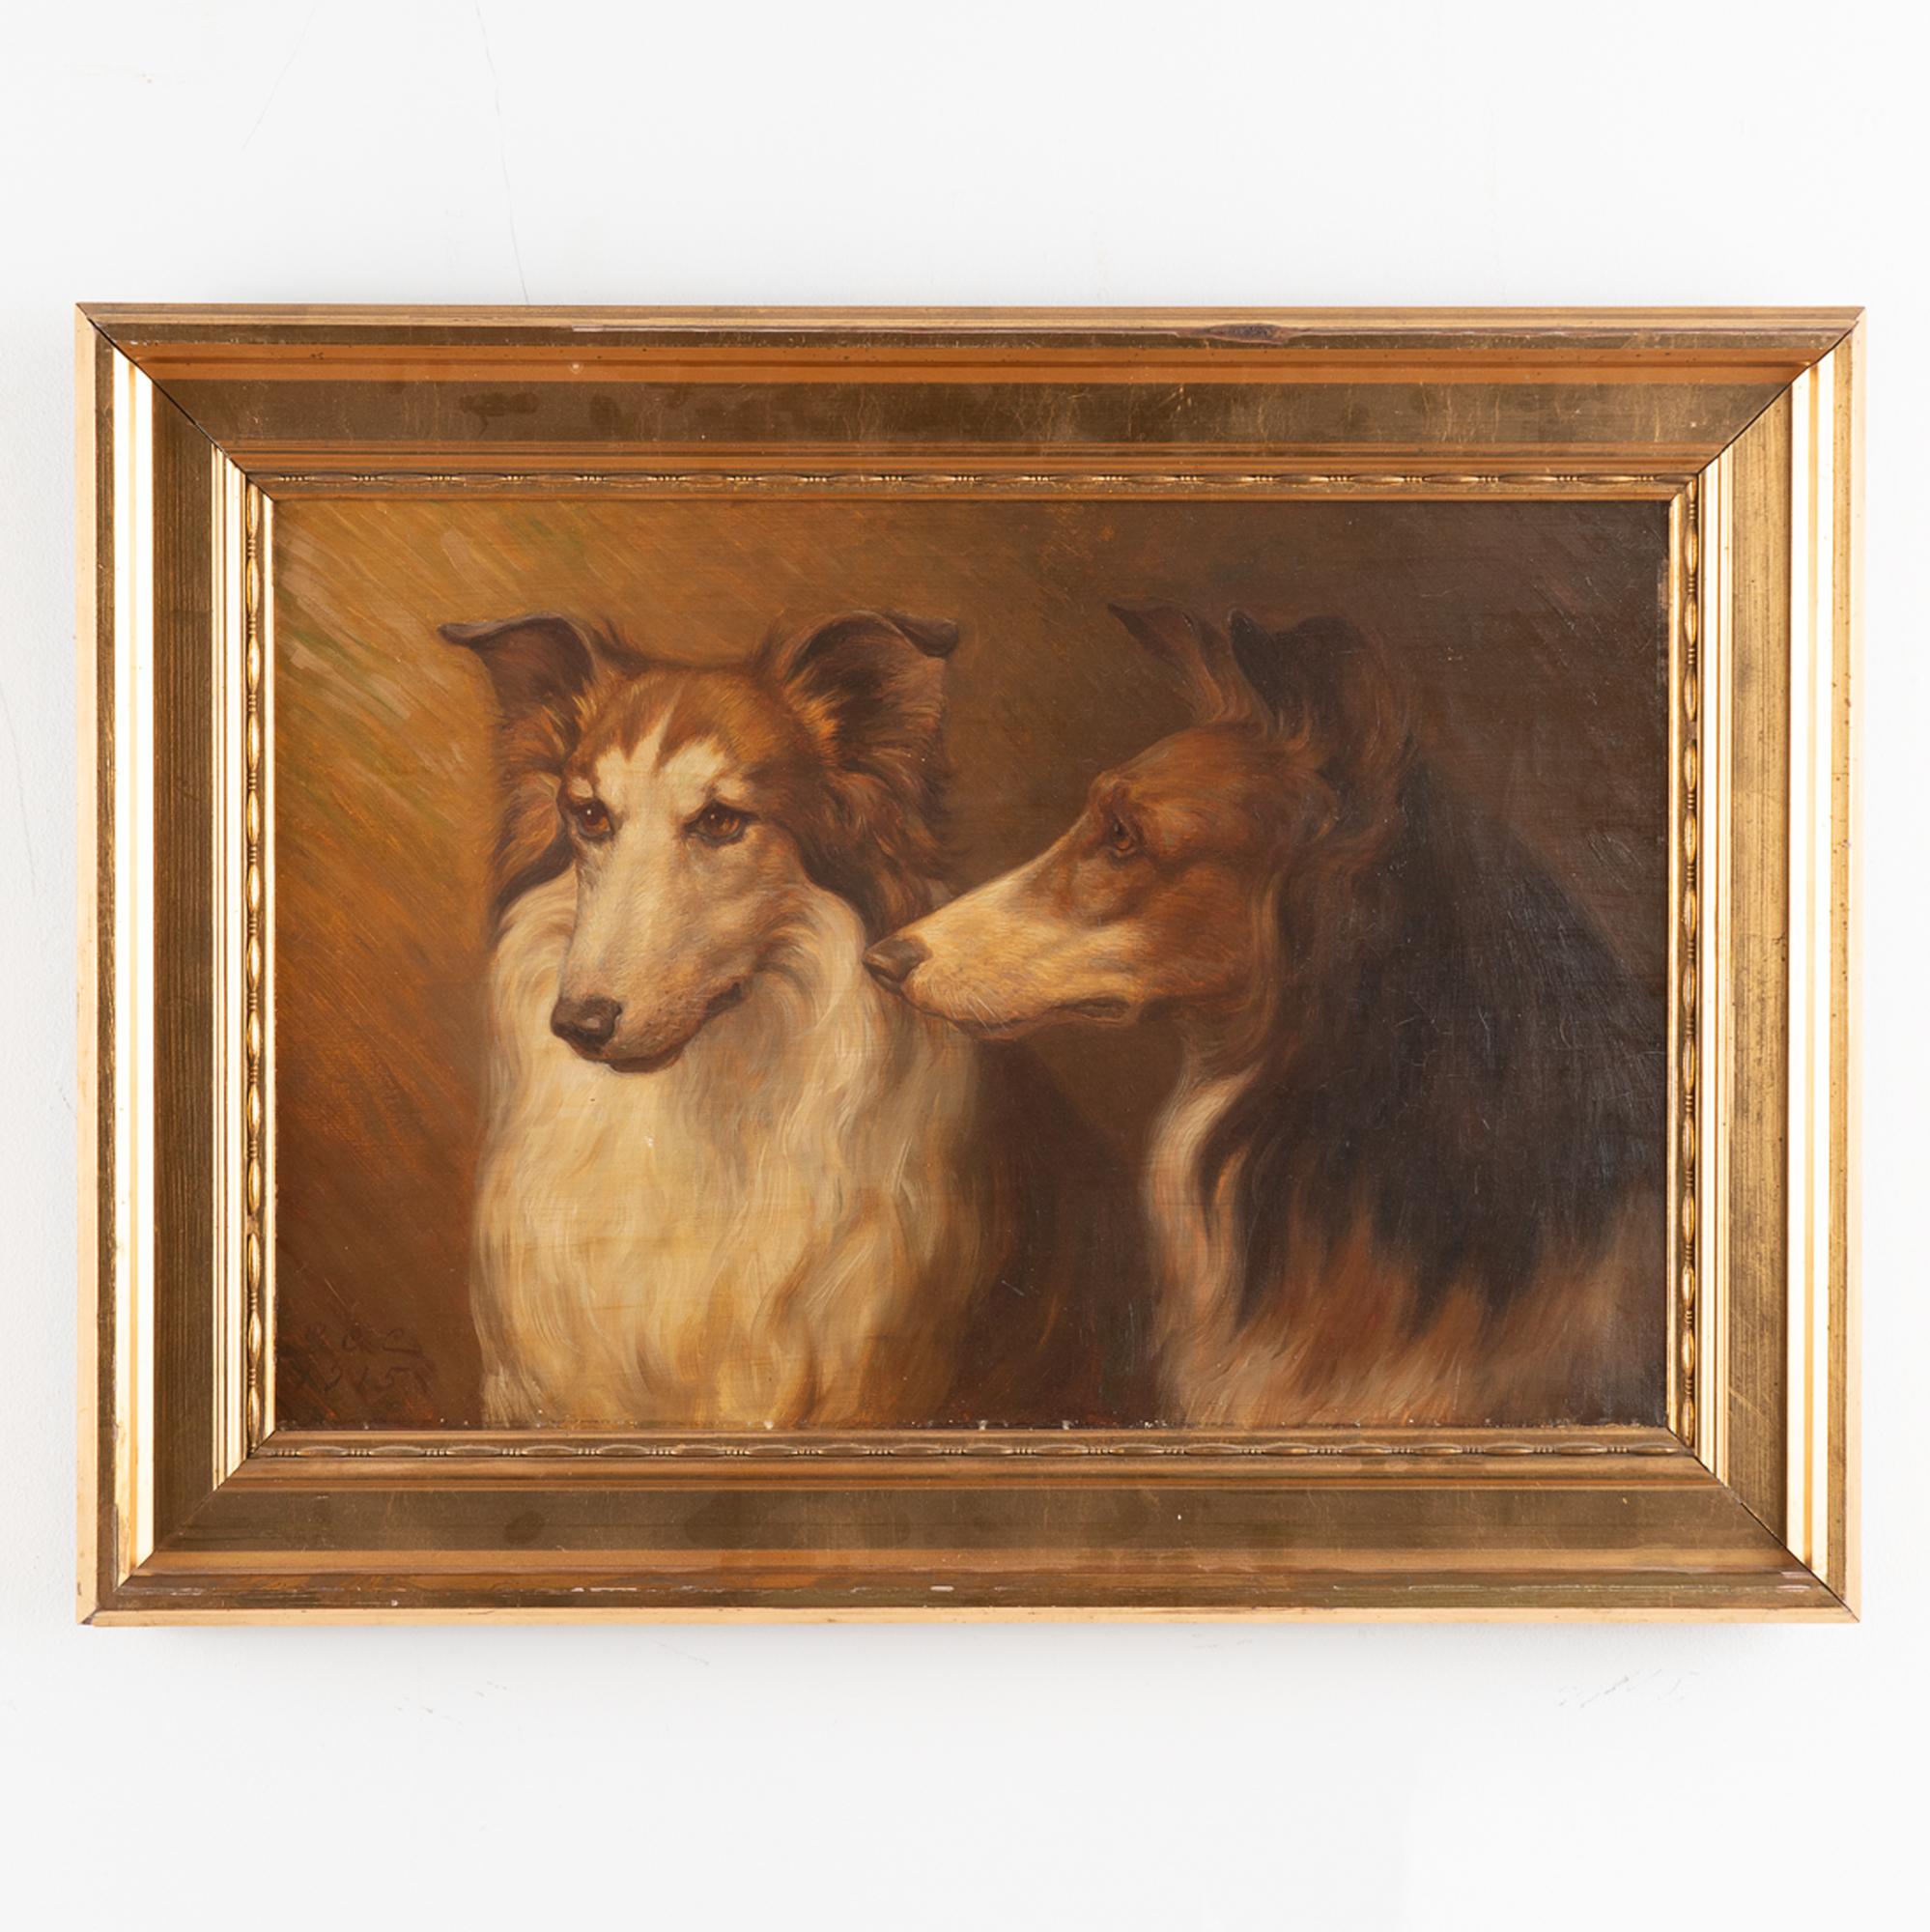 Original oil on canvas painting; portrait of two collies by G. A. Clemens.
Signed and dated G. A. C. 1915. 

Condition: Canvas may benefit from light surface cleaning. Crackles and peelings.
Artist: G. A. Clemens (b. Copenhagen 1870, d.